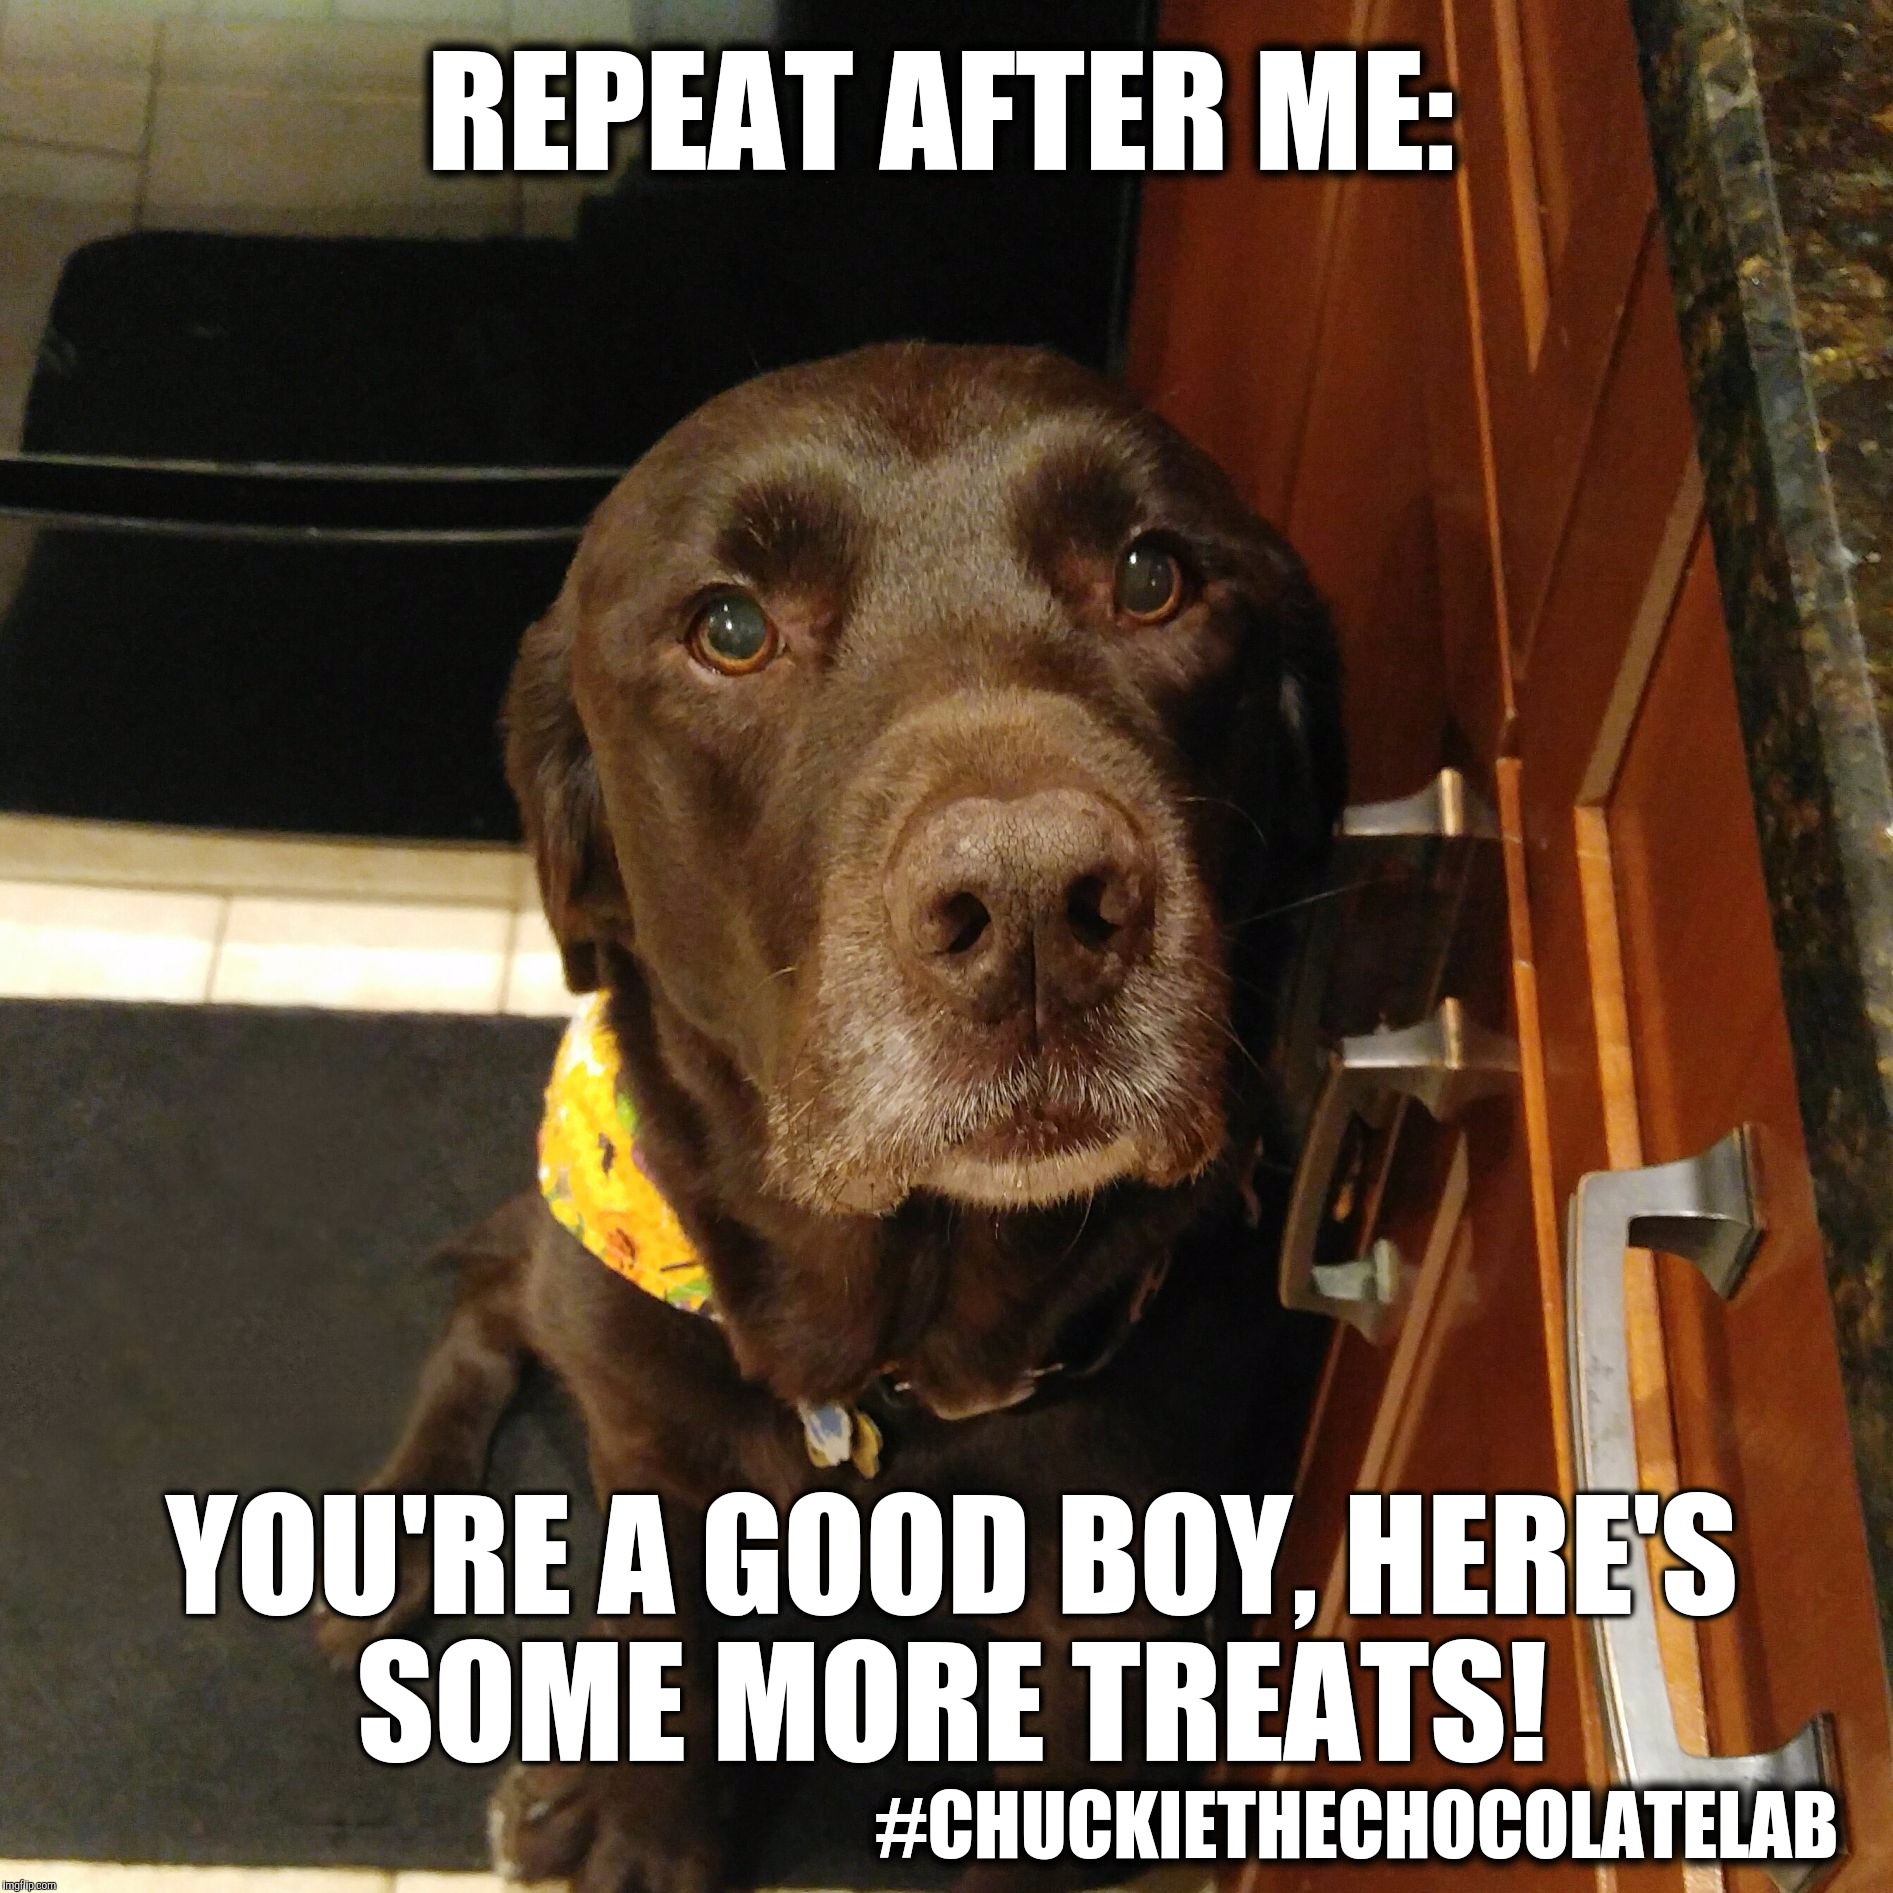 Dog Mind Control  |  REPEAT AFTER ME:; YOU'RE A GOOD BOY, HERE'S SOME MORE TREATS! #CHUCKIETHECHOCOLATELAB | image tagged in chuckie the chocolate lab,repeat after me,mind control,funny,dogs,labrador | made w/ Imgflip meme maker